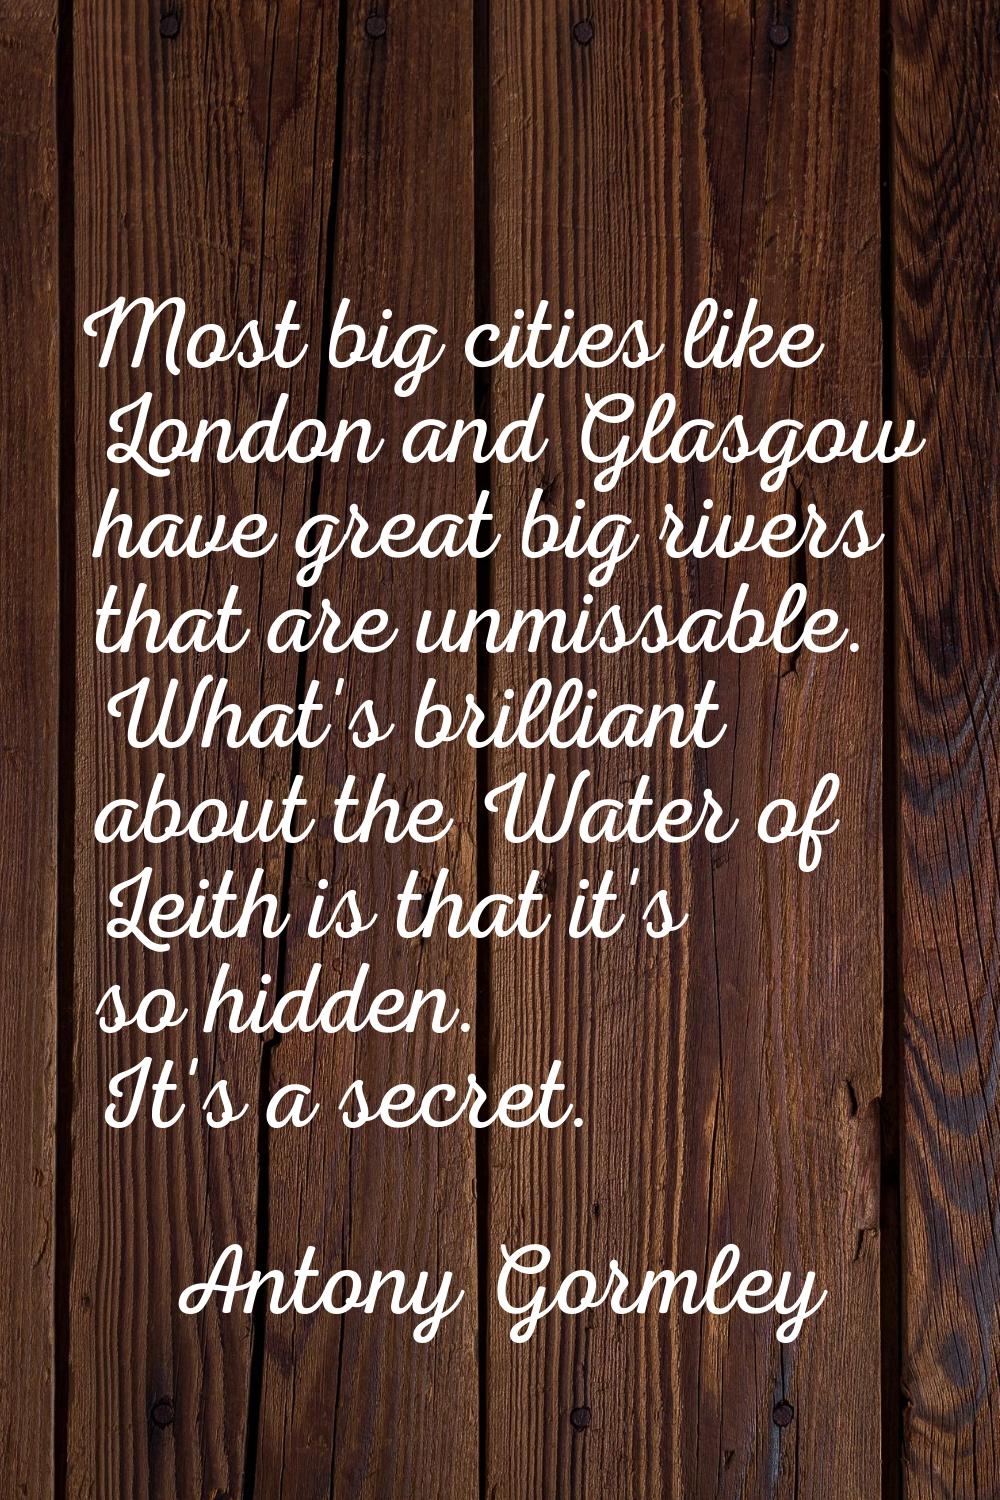 Most big cities like London and Glasgow have great big rivers that are unmissable. What's brilliant